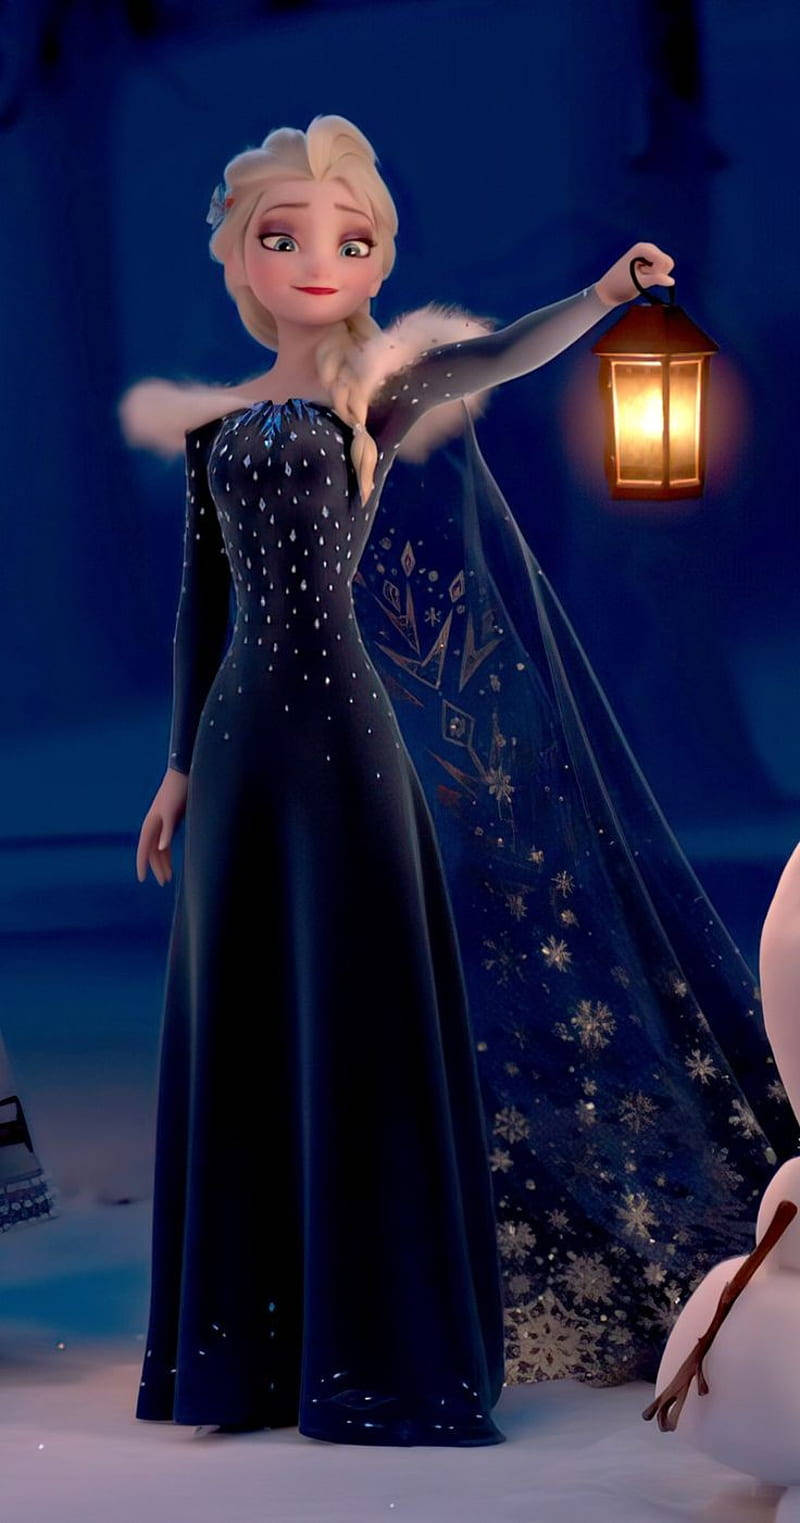 Elsa With Lamp Frozen 2 Background